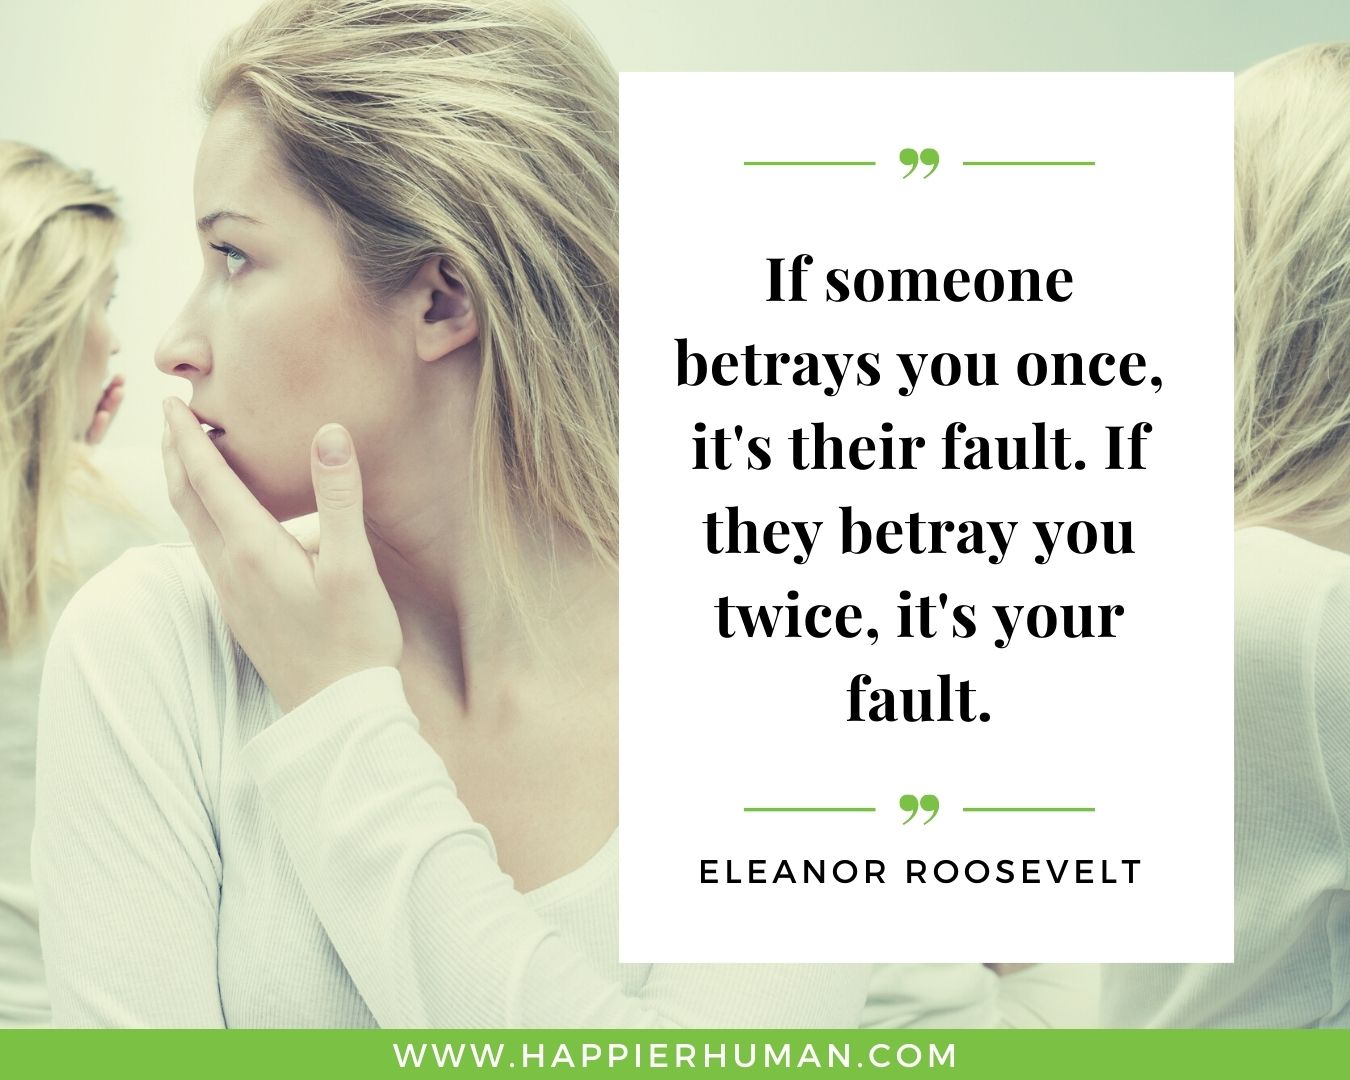 Broken Trust Quotes - “If someone betrays you once, it's their fault. If they betray you twice, it's your fault.” - Eleanor Roosevelt